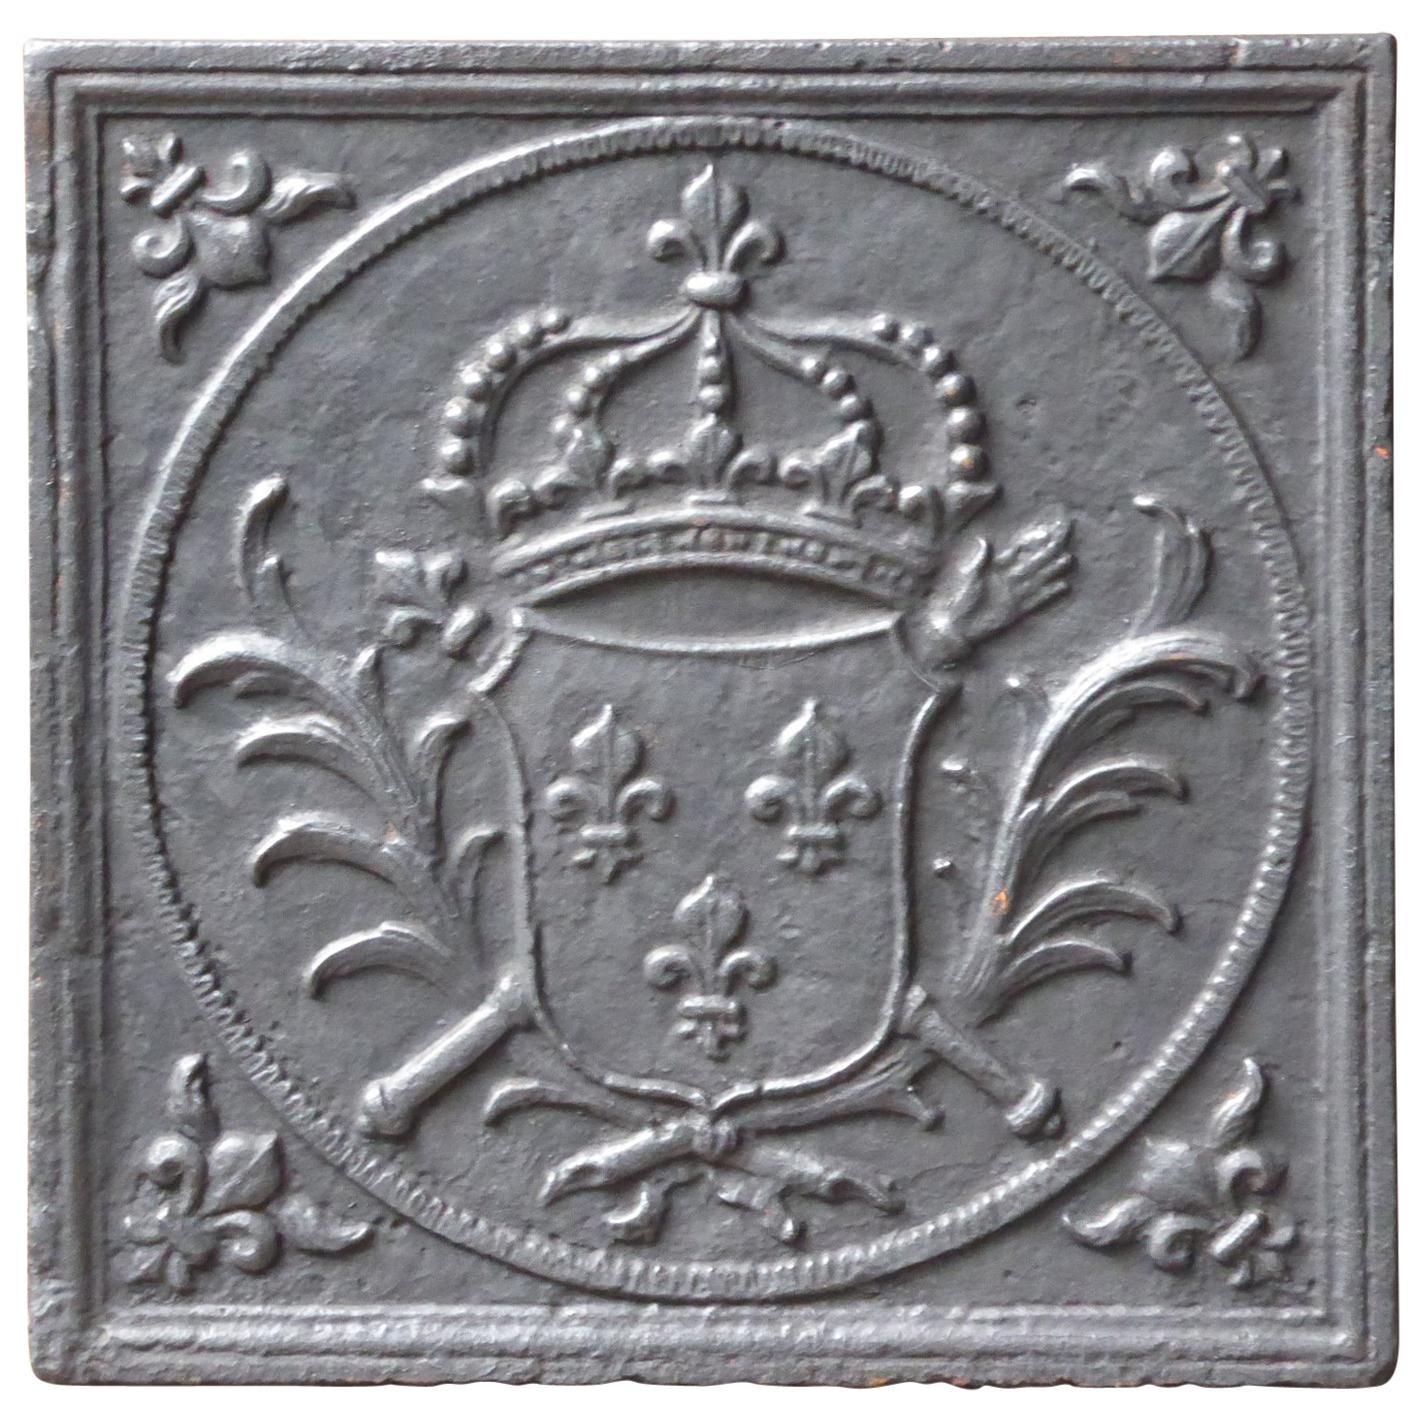 Antique French Fireback with Coat of Arms of France, 18th Century